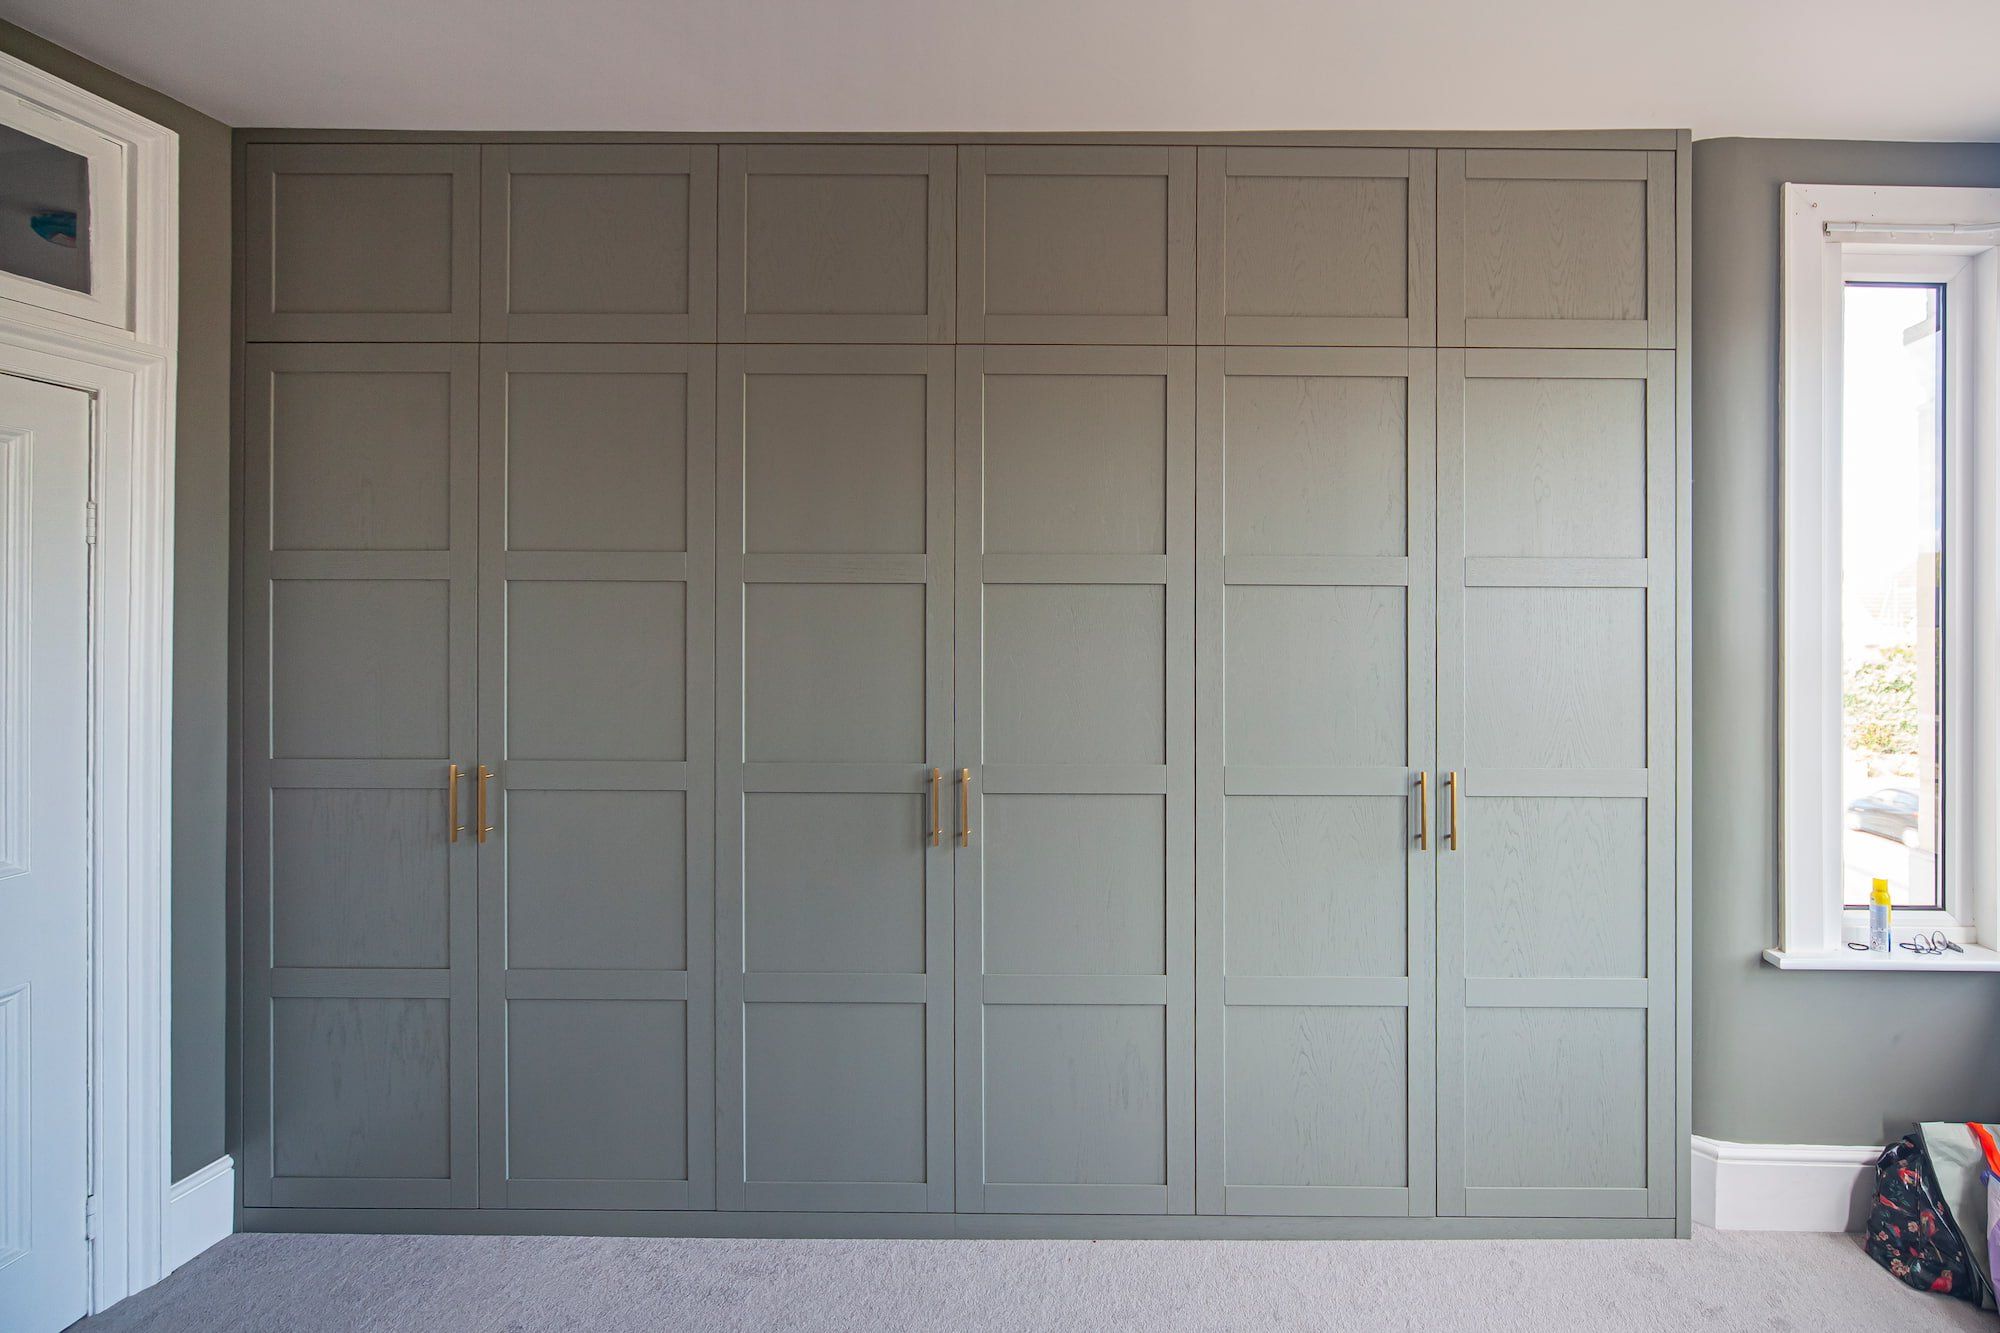 Malmo – Lacquered Real Wood Fitted Wardrobes With Visible Wooden Grain Throughout Wood Wardrobes (View 18 of 20)